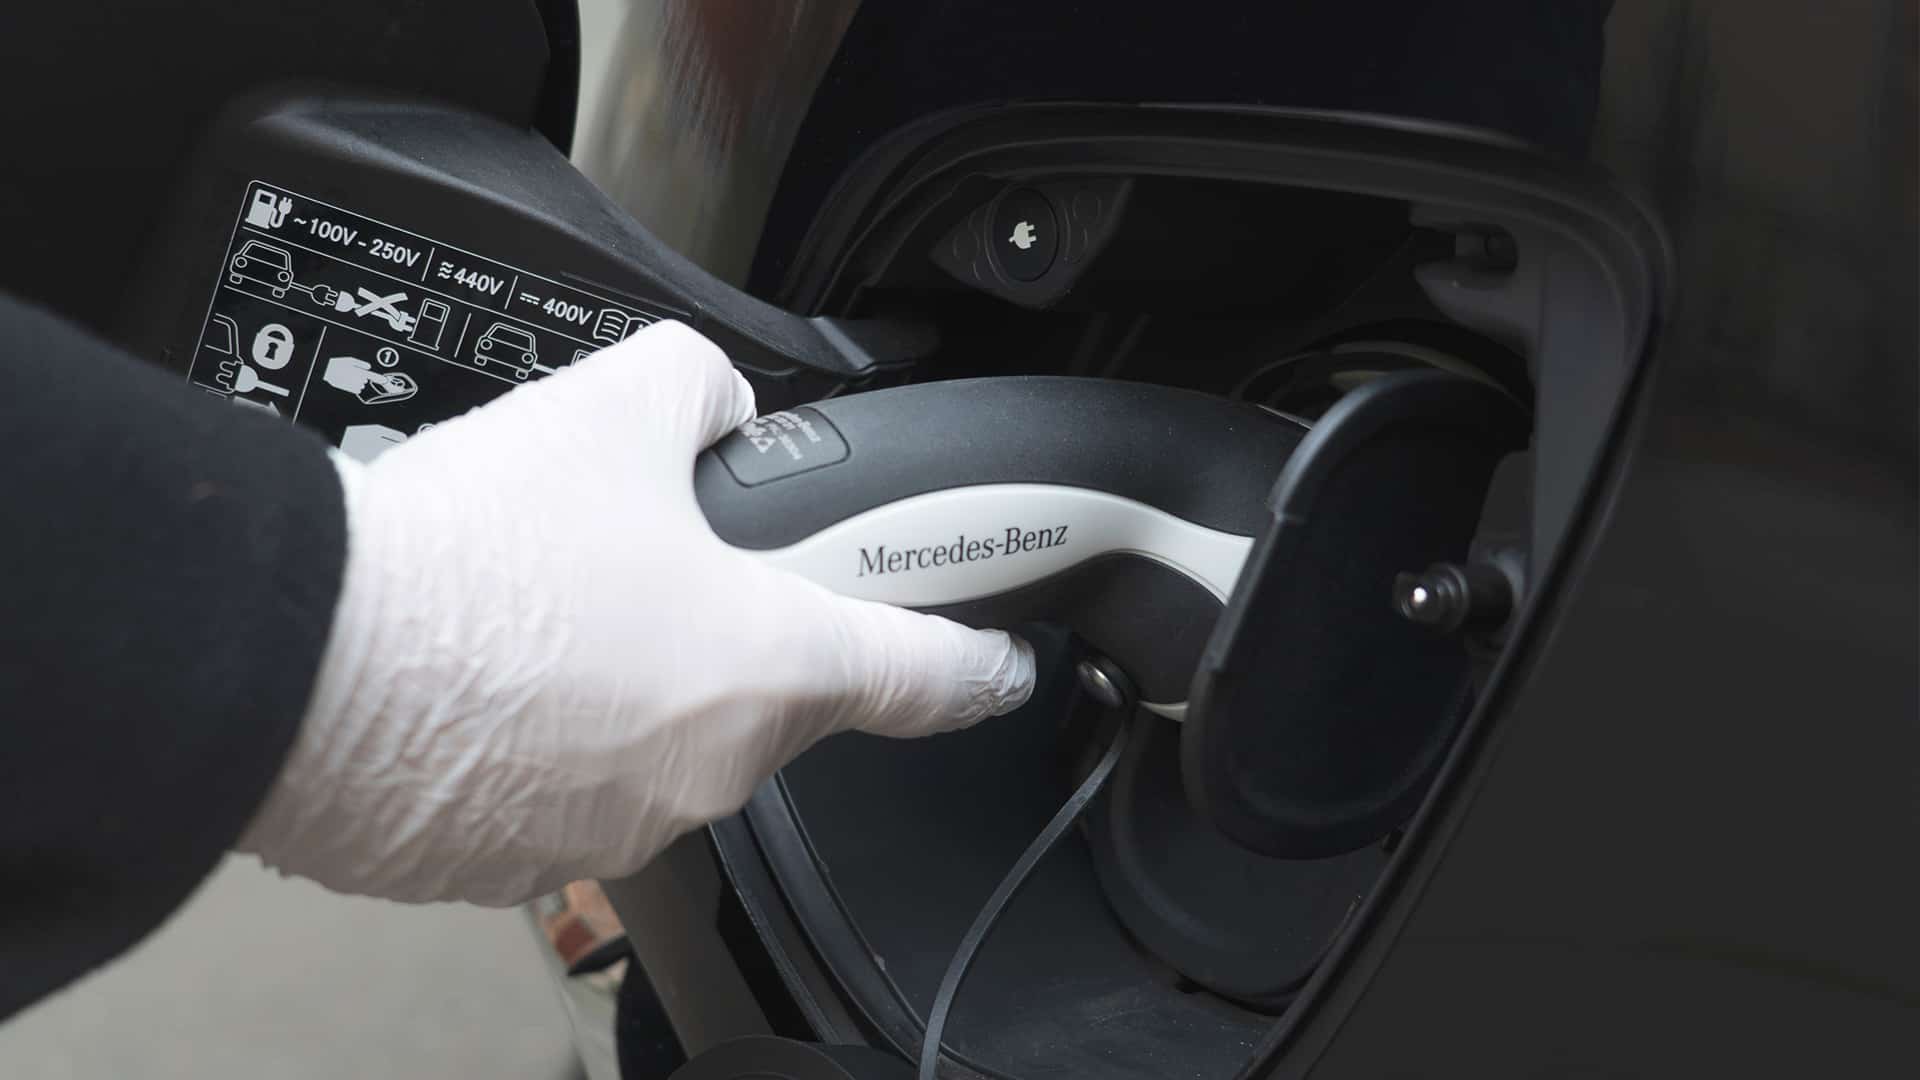 Blacklane welcomes many electric vehicles into its fleet.